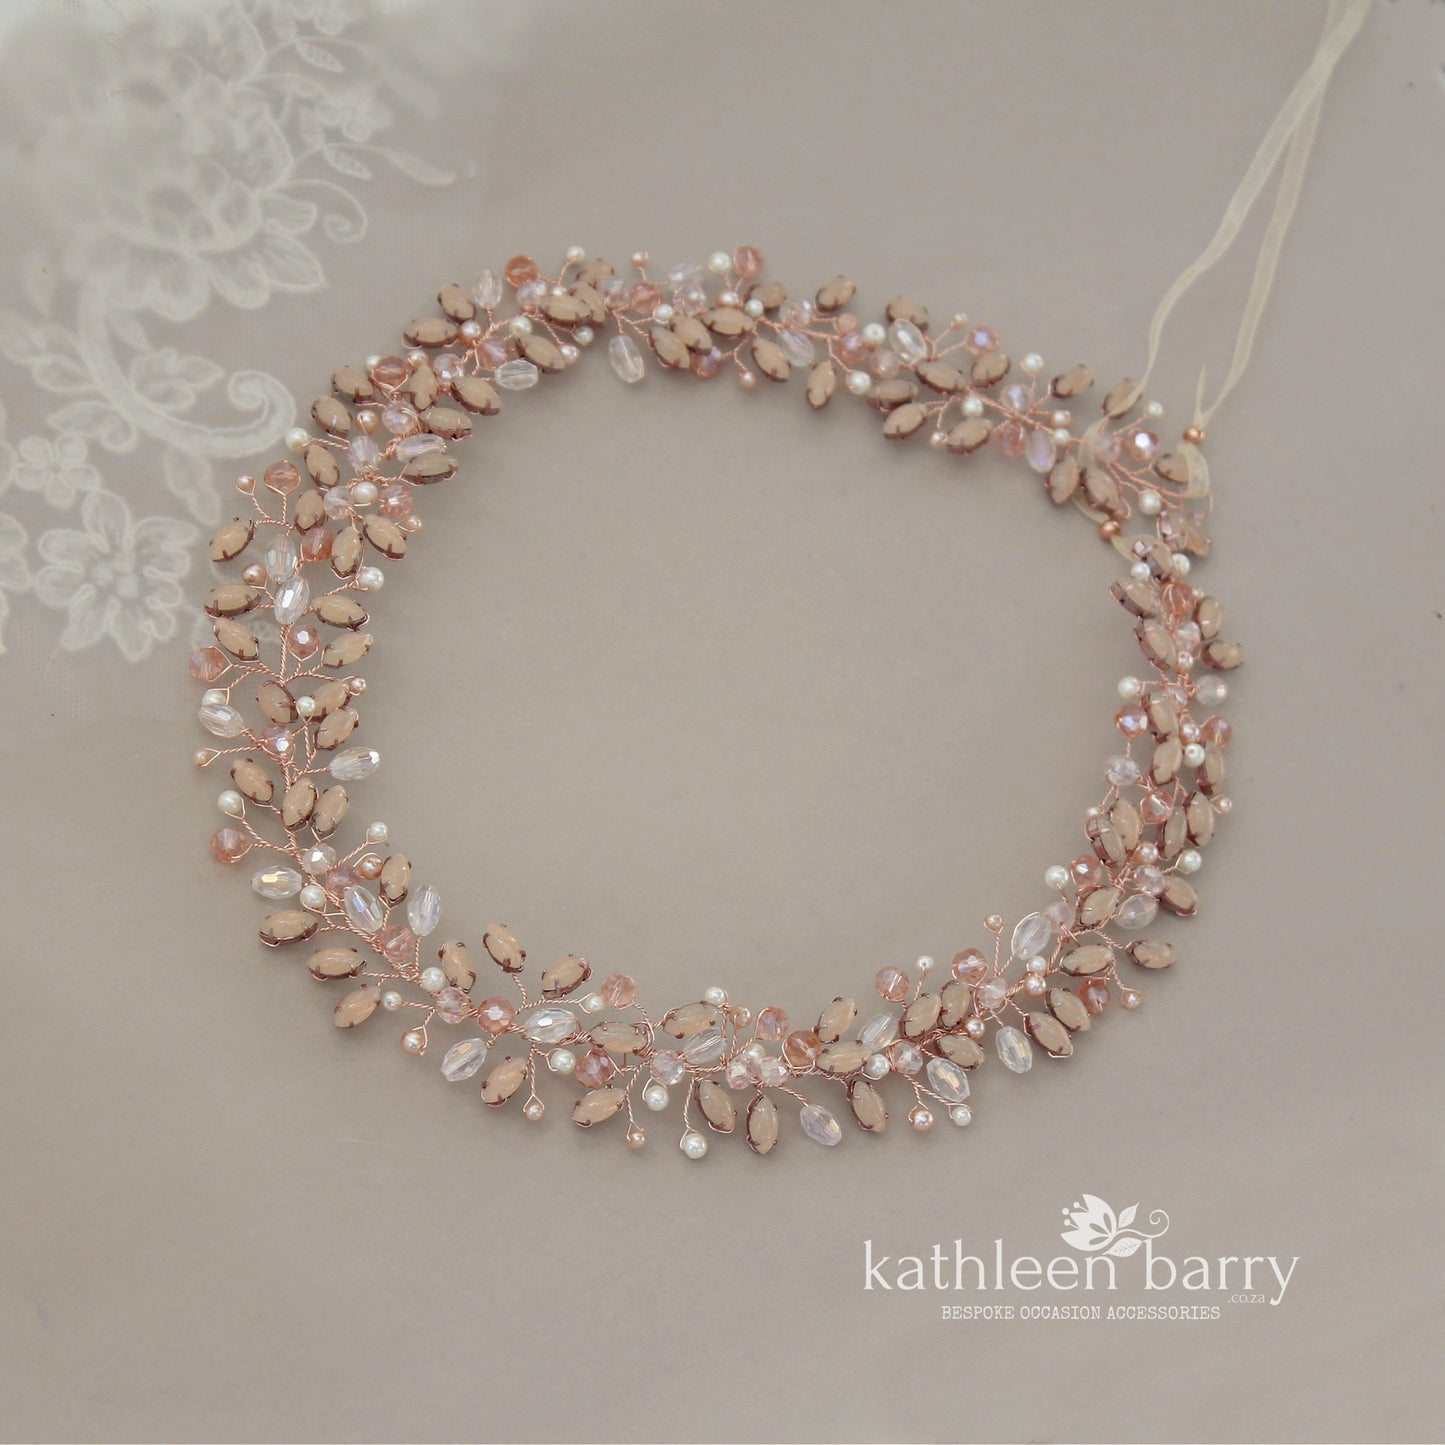 Ashley Rose Gold Blush Crown Bridal Wreath - Available rose gold, gold or silver plated - two size options FROM: